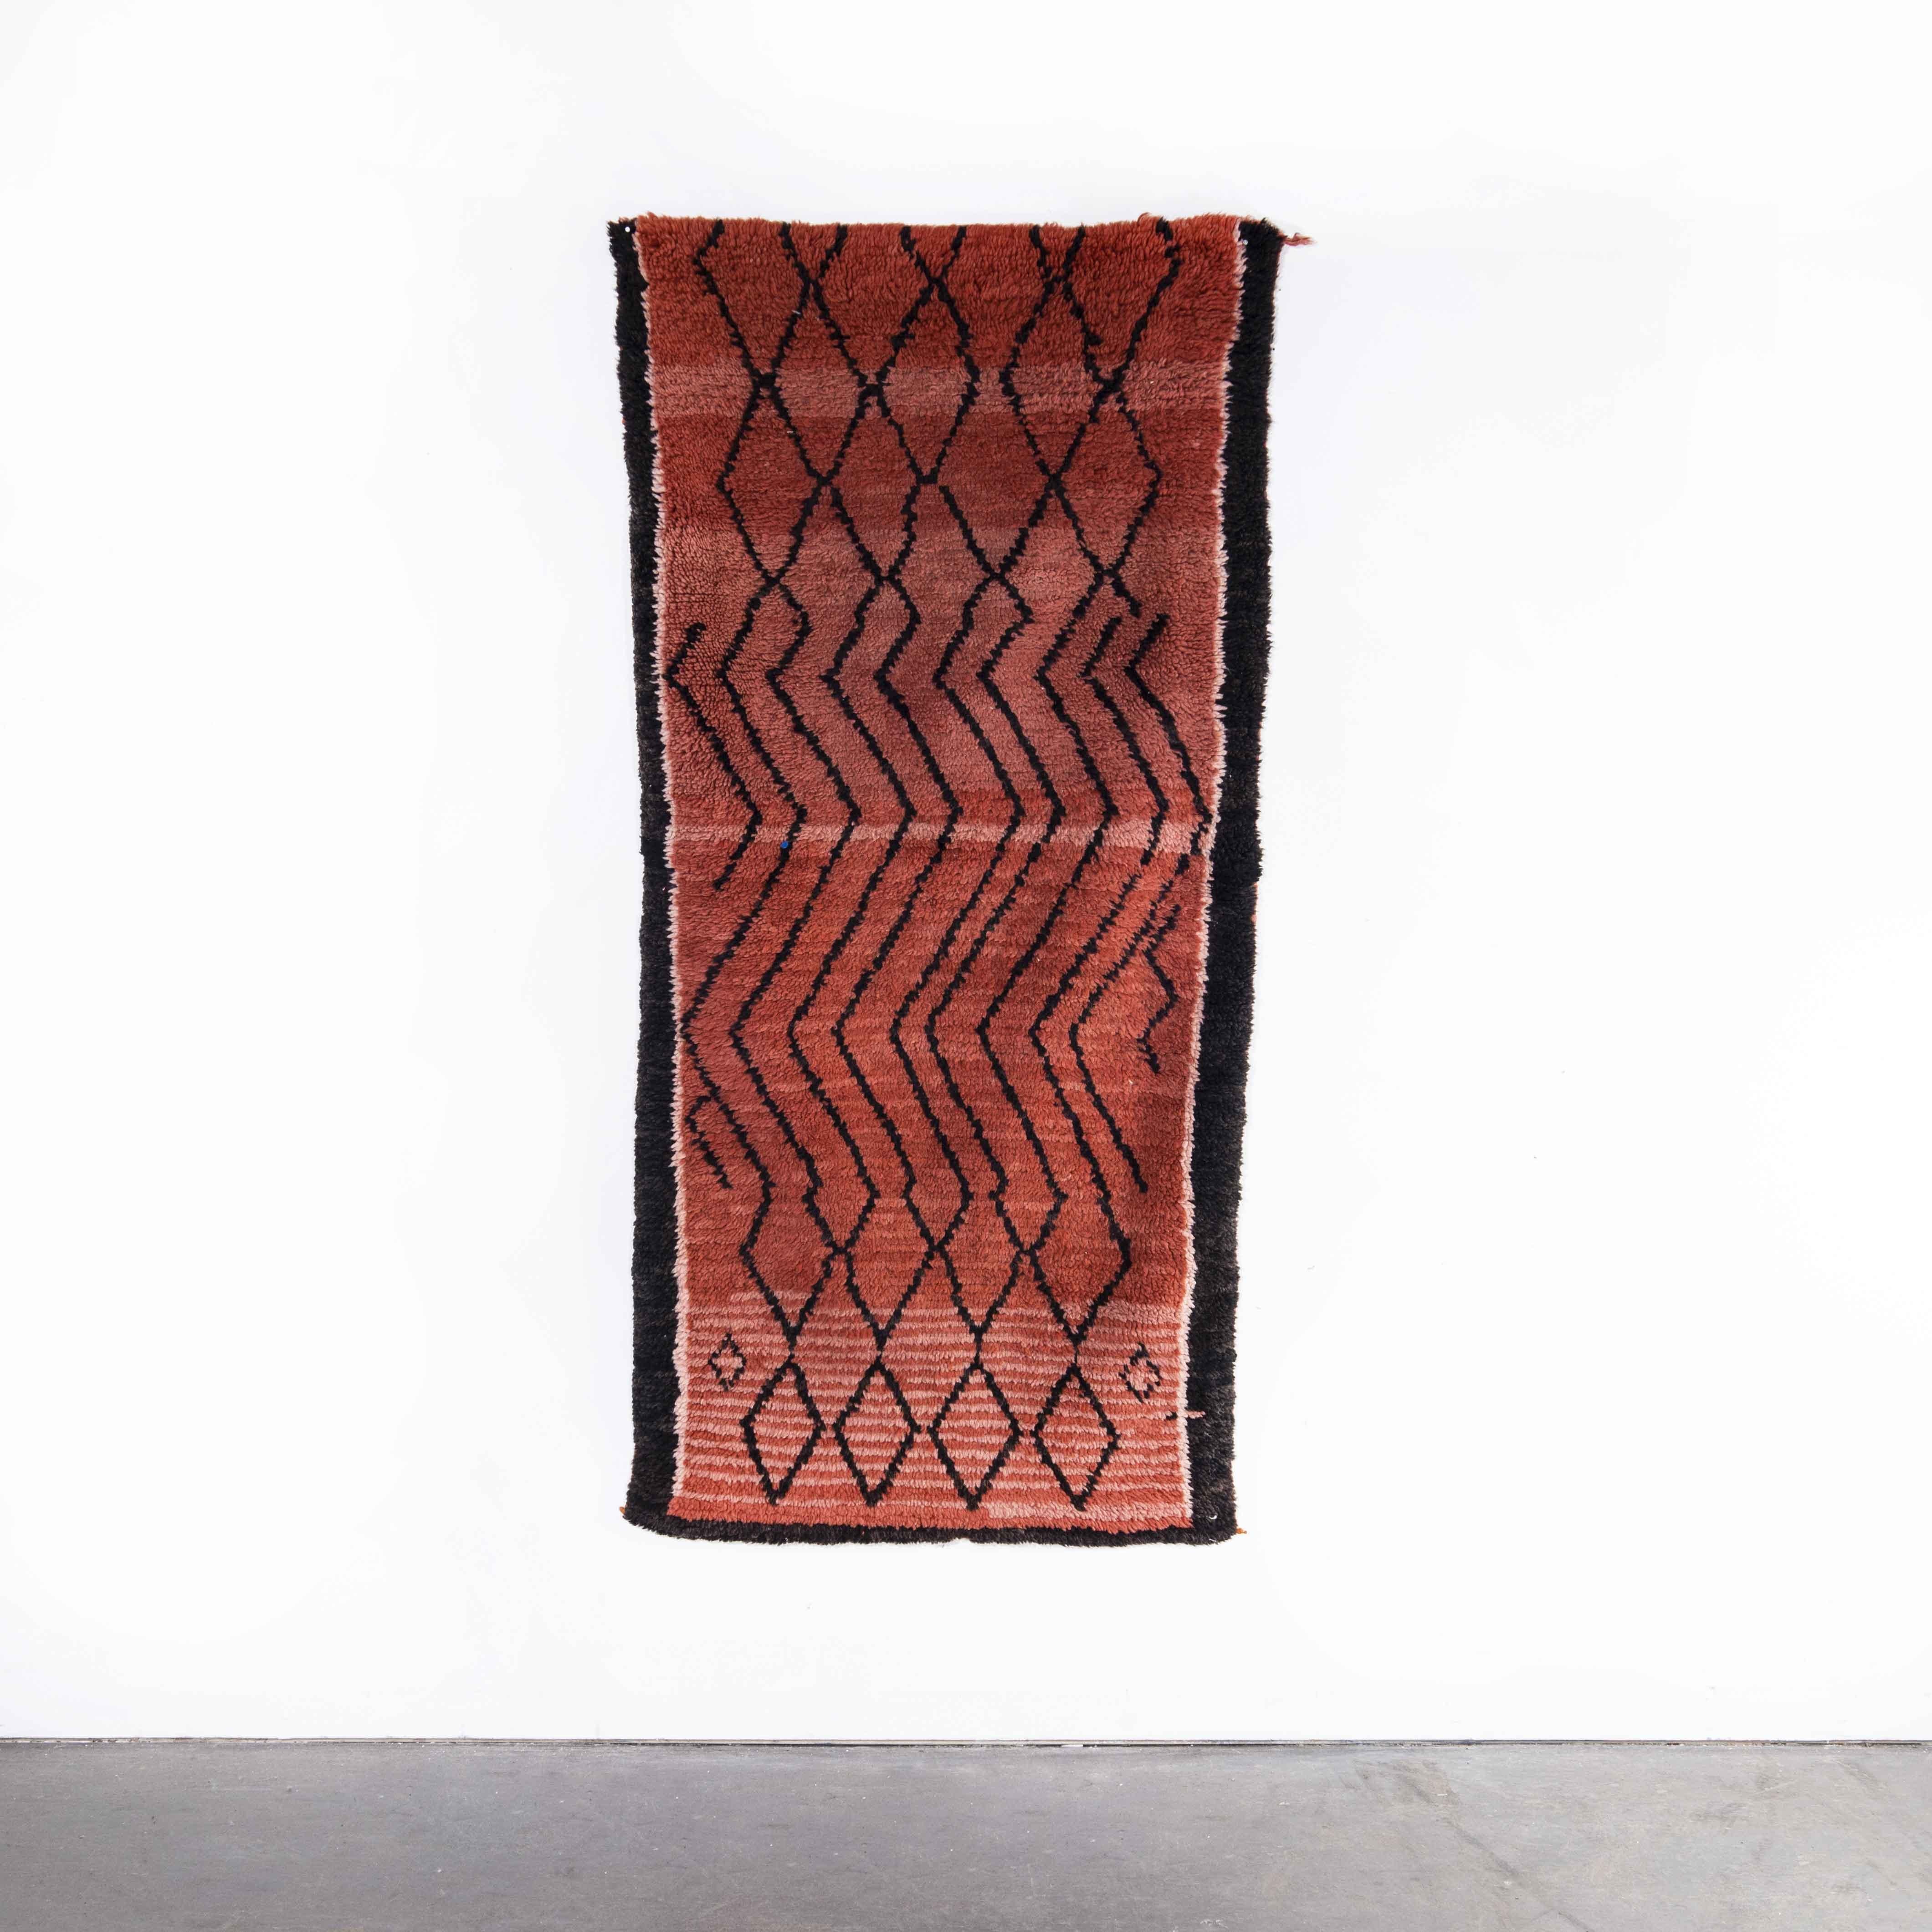 Vintage Berber Azilal red washed diamond pattern graphic rug
Vintage Berber Azilal red washed diamond pattern graphic rug. Azilal rugs are the most exuberant and colourful of Berber rugs, Diamonds shapes and strong lines play heavily into the